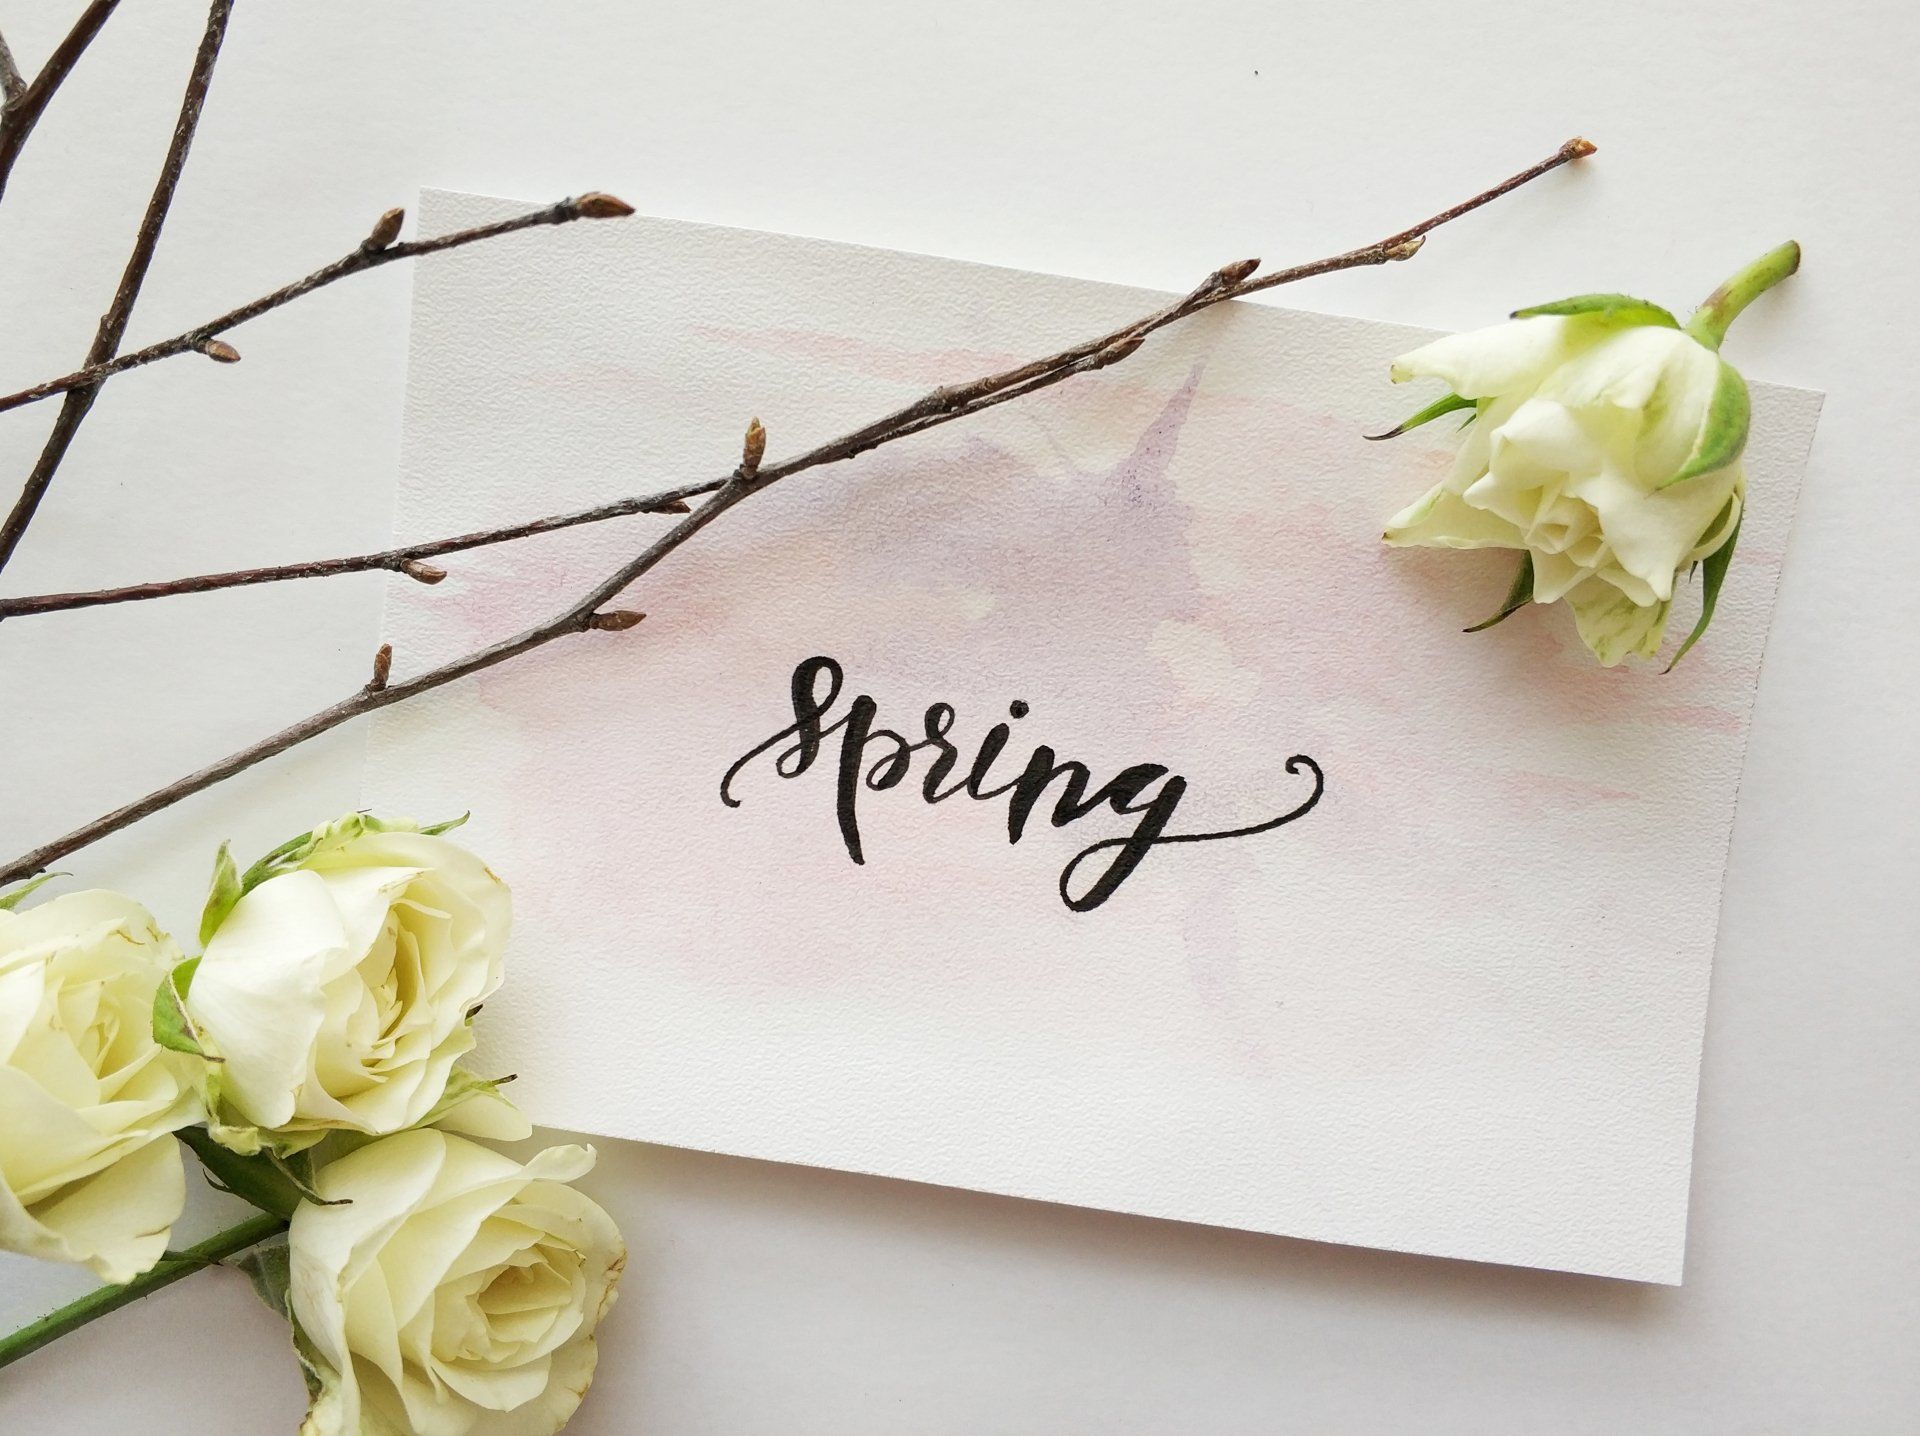 a piece of paper with the word spring written on it